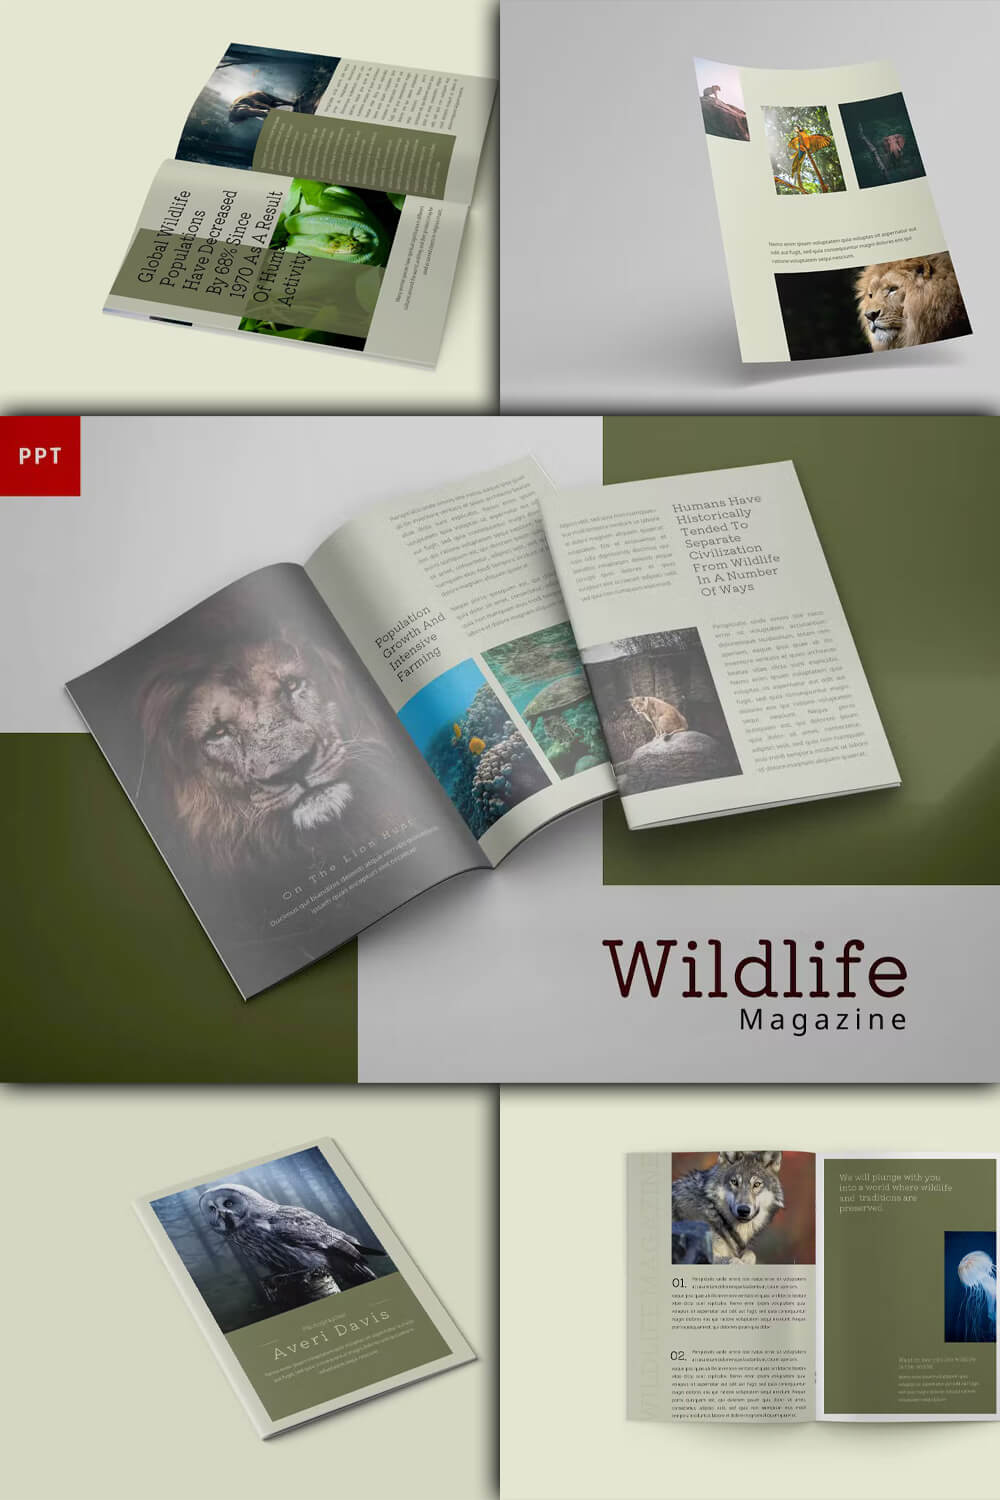 Examples of wildlife photography in a wildlife magazine.